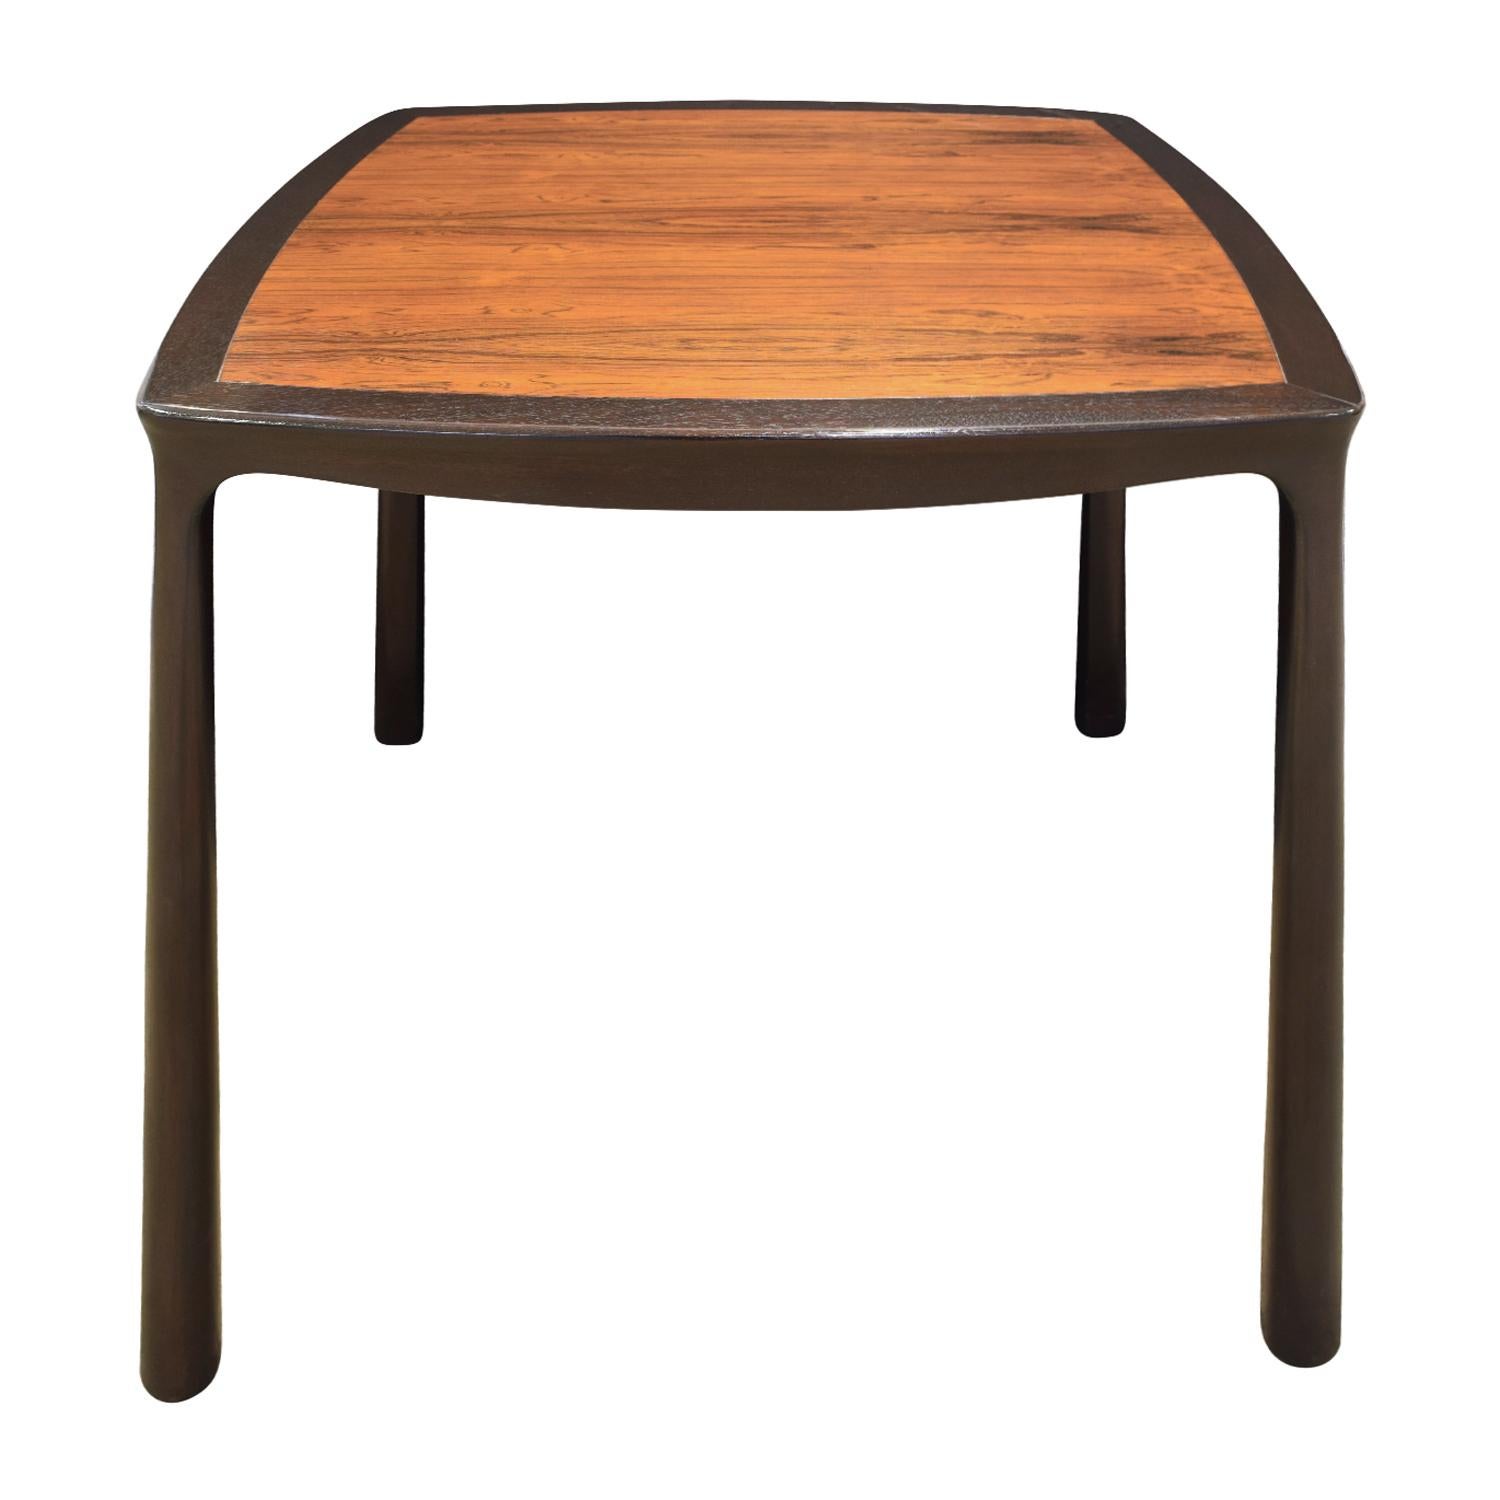 Mid-Century Modern Edward Wormley Game Table in Mahogany with Rosewood Top 1963 'Signed'